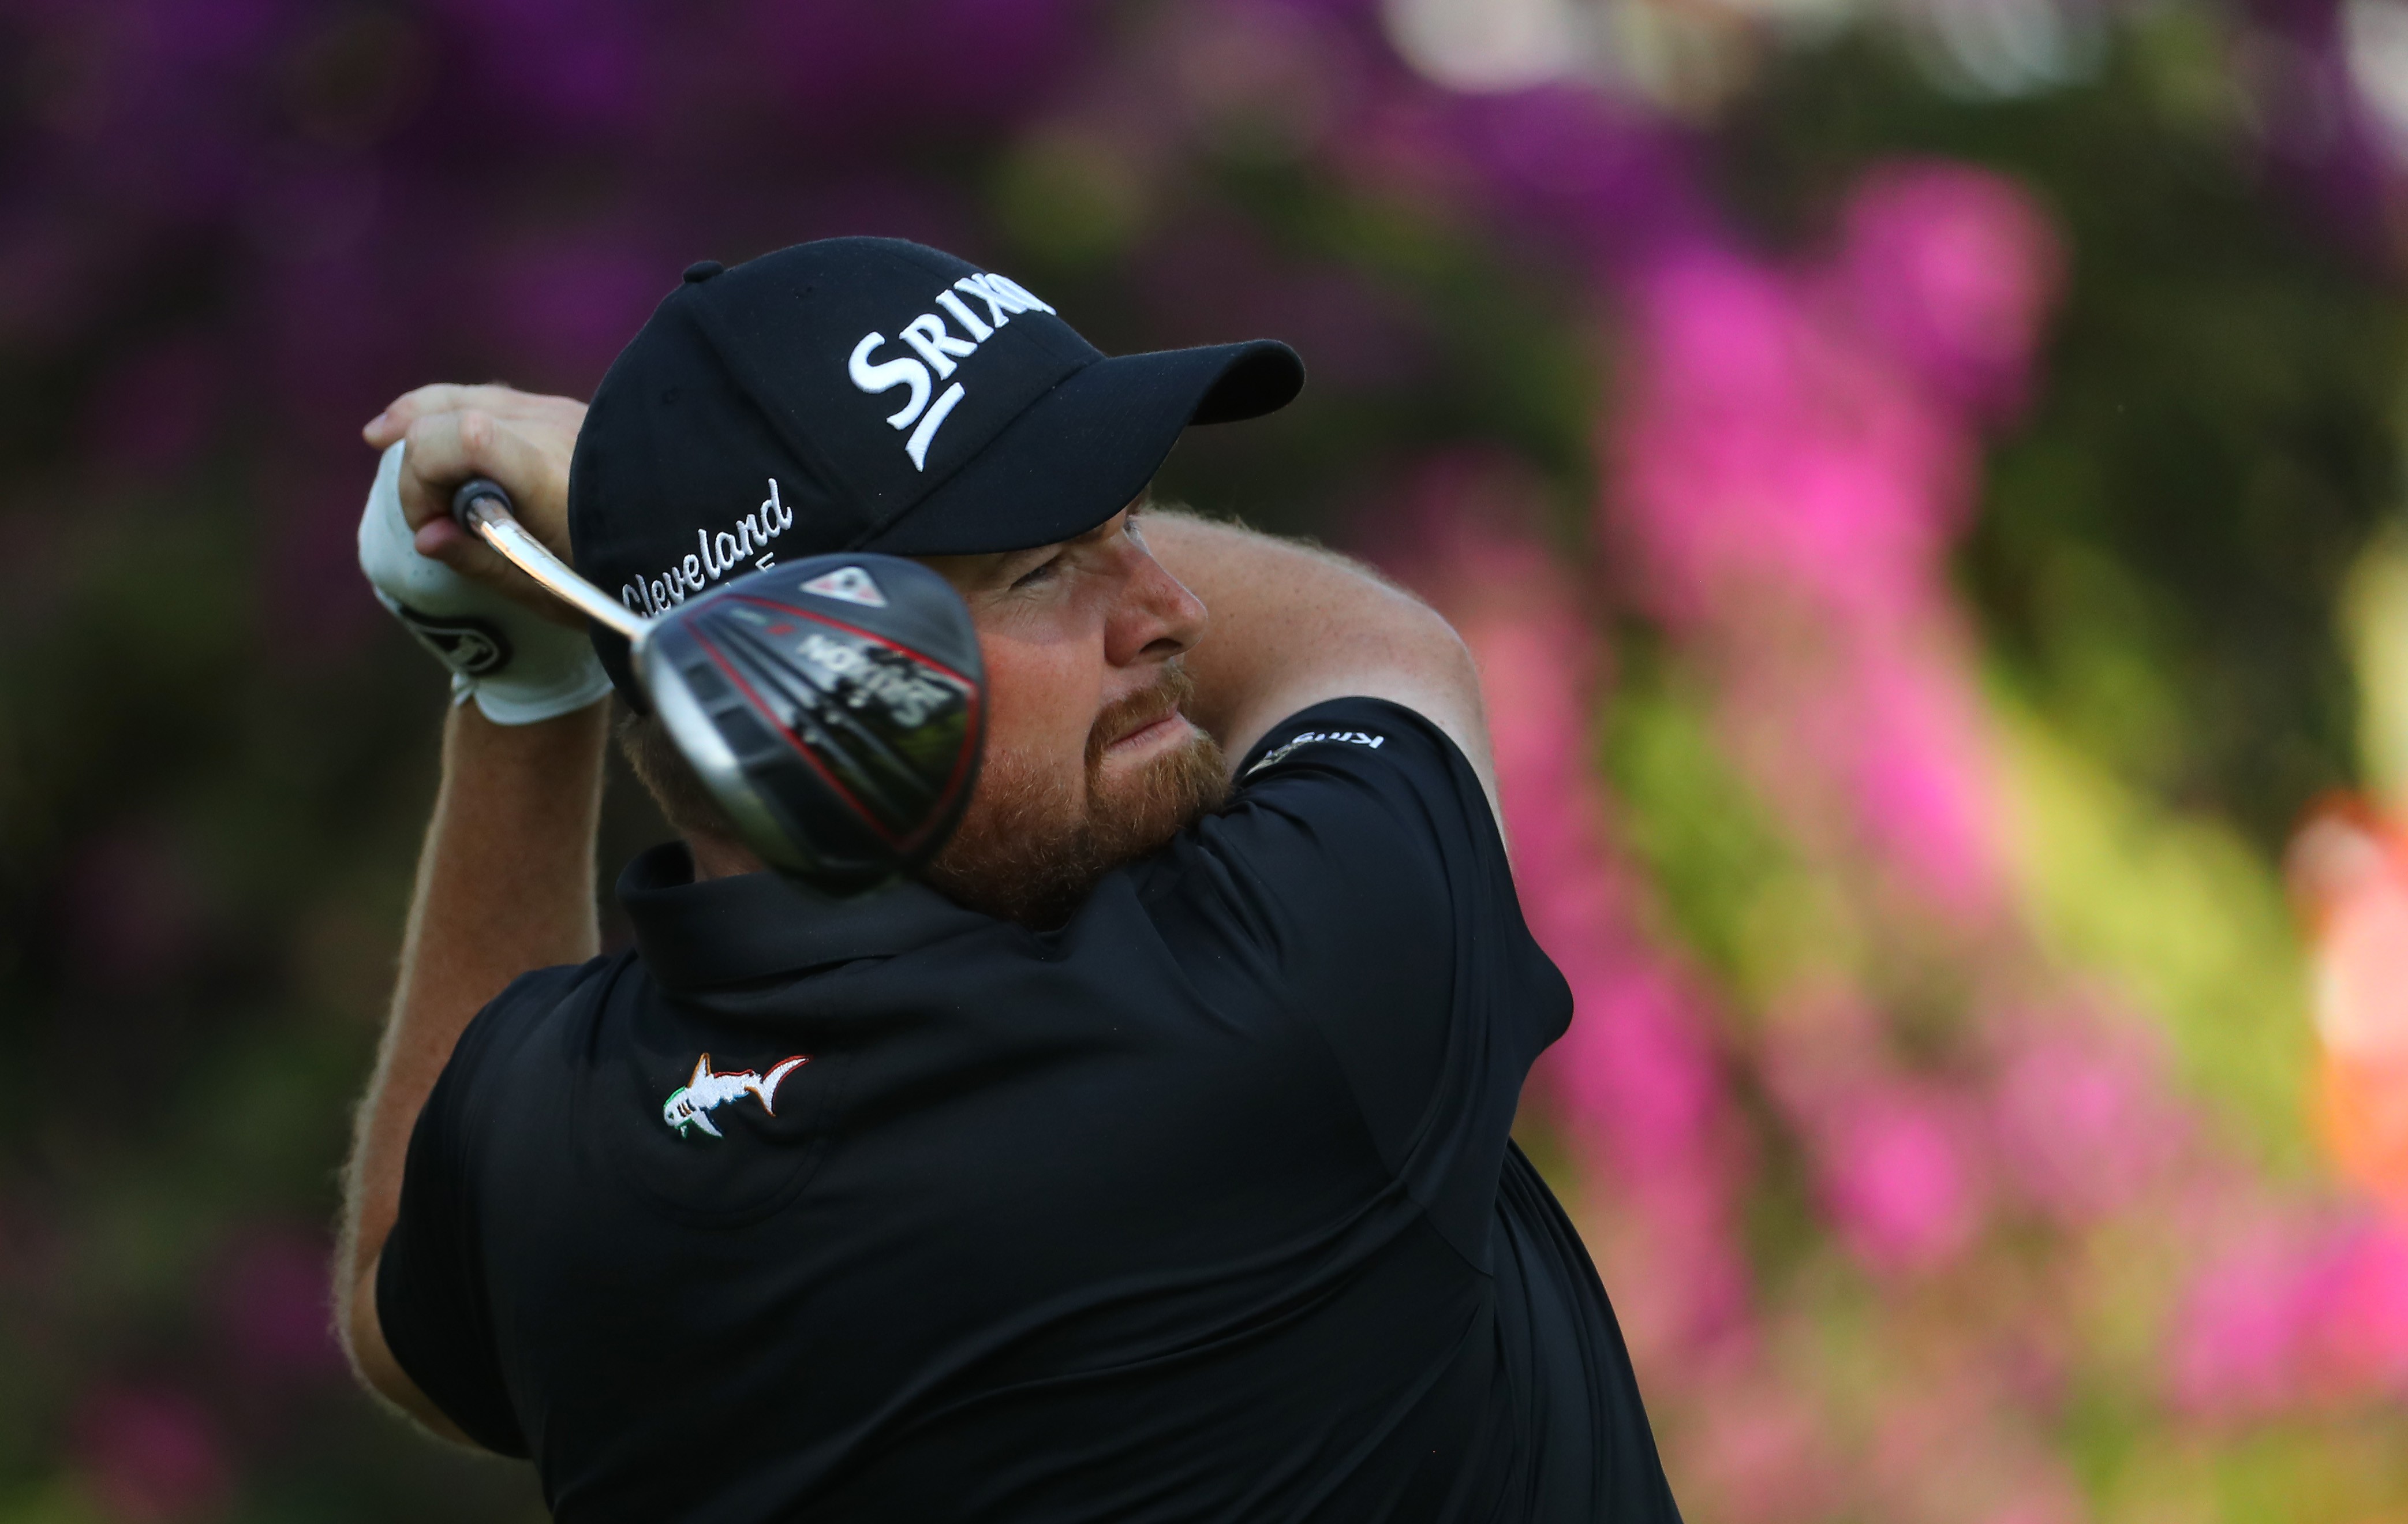 All eyes will be on British Open champion Shane Lowry, of Ireland, at this week’s Hong Kong Open. Photo: Getty Images